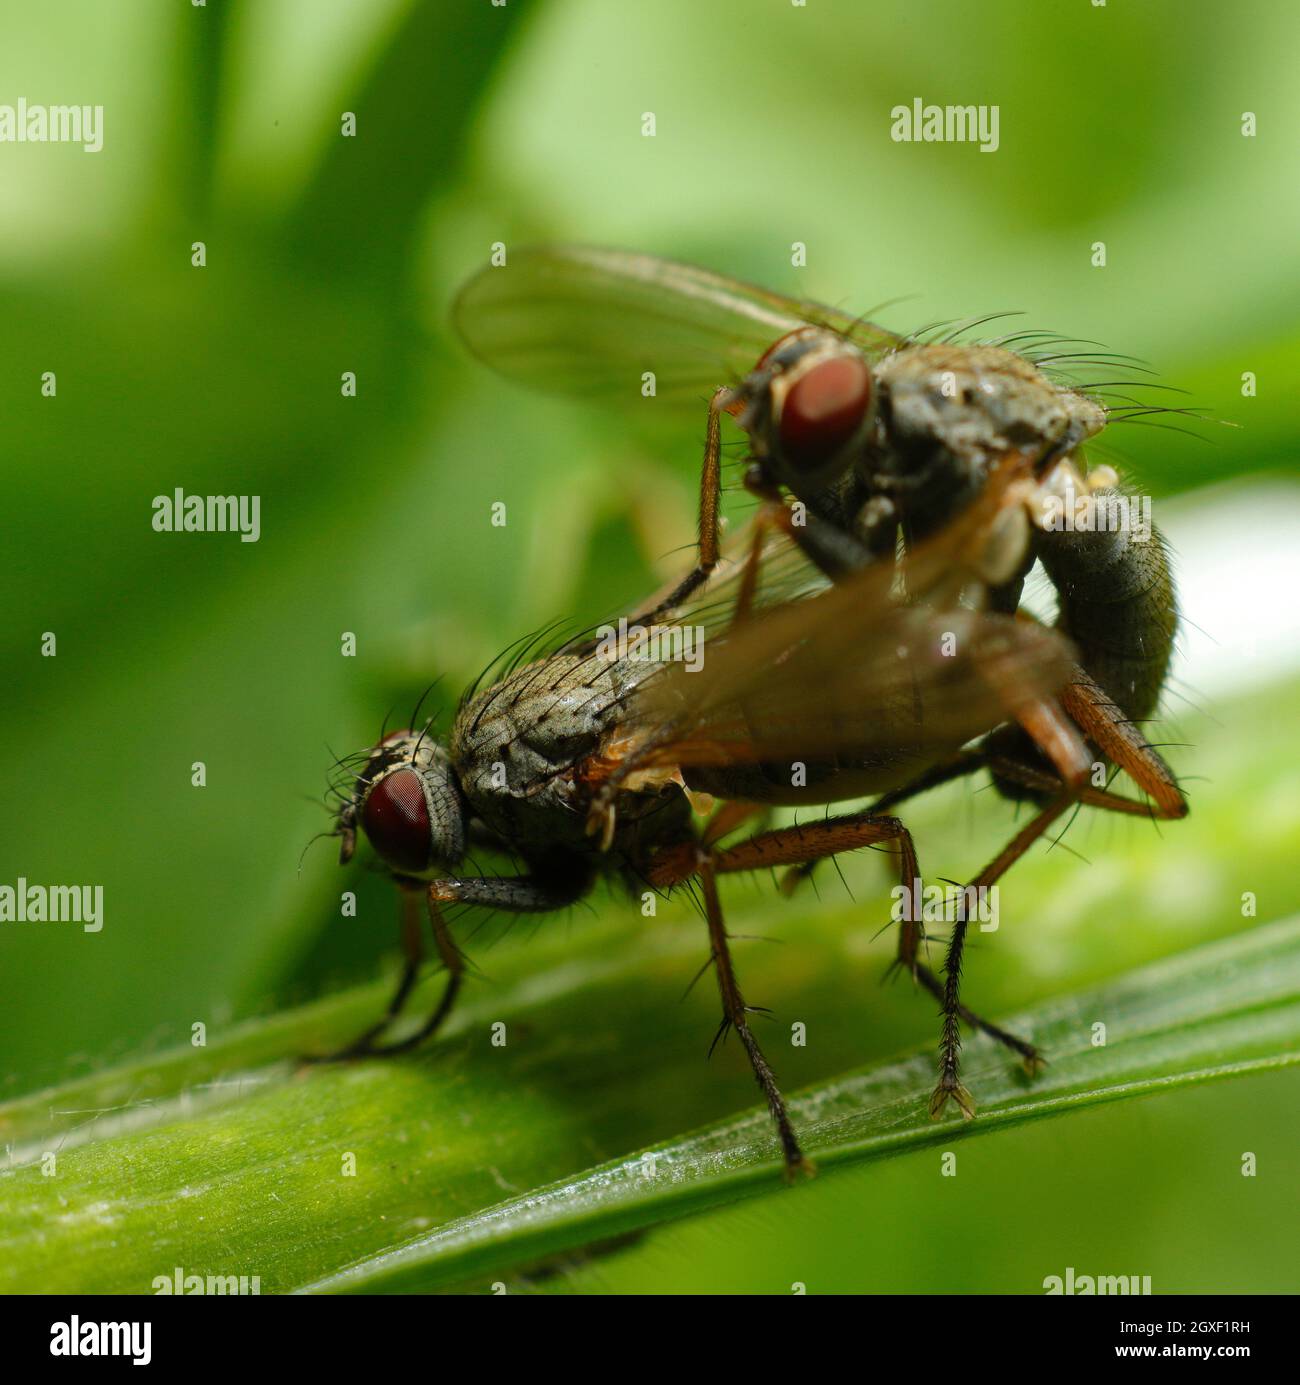 A Fly's compound eyes. Stock Photo